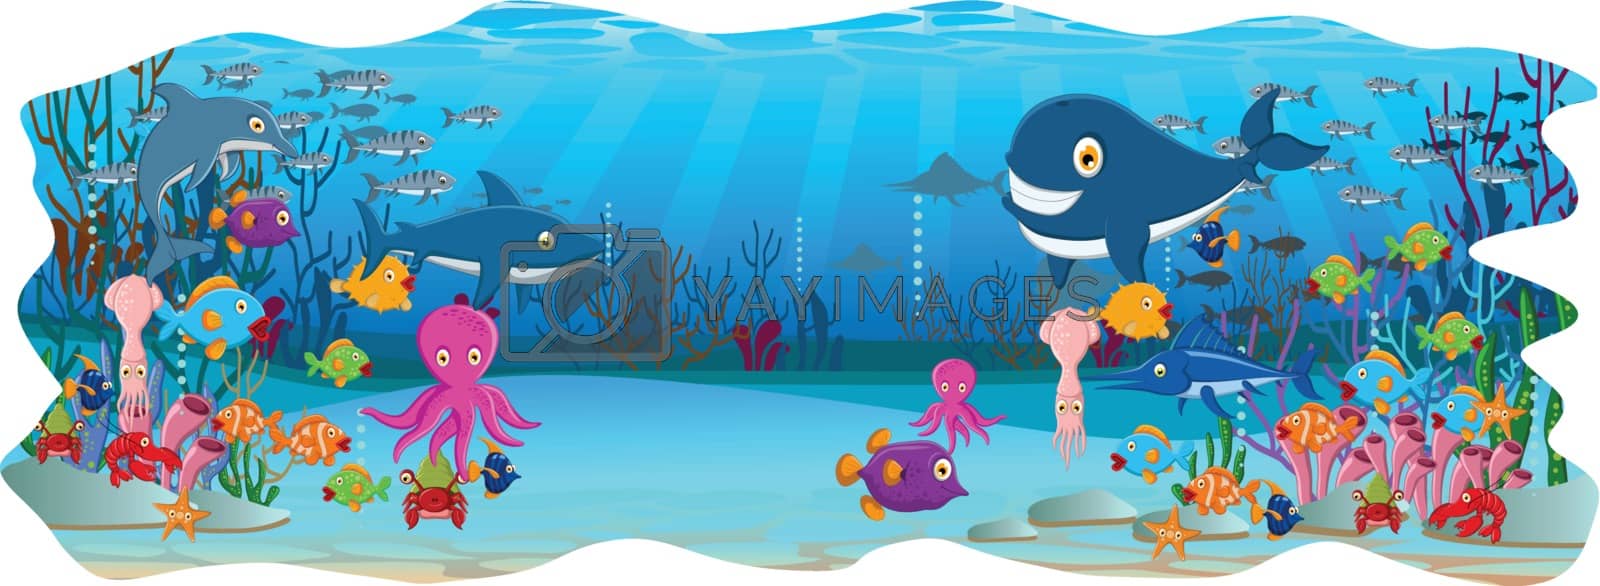 Royalty free image of funny cartoon sea life for you design by sujono